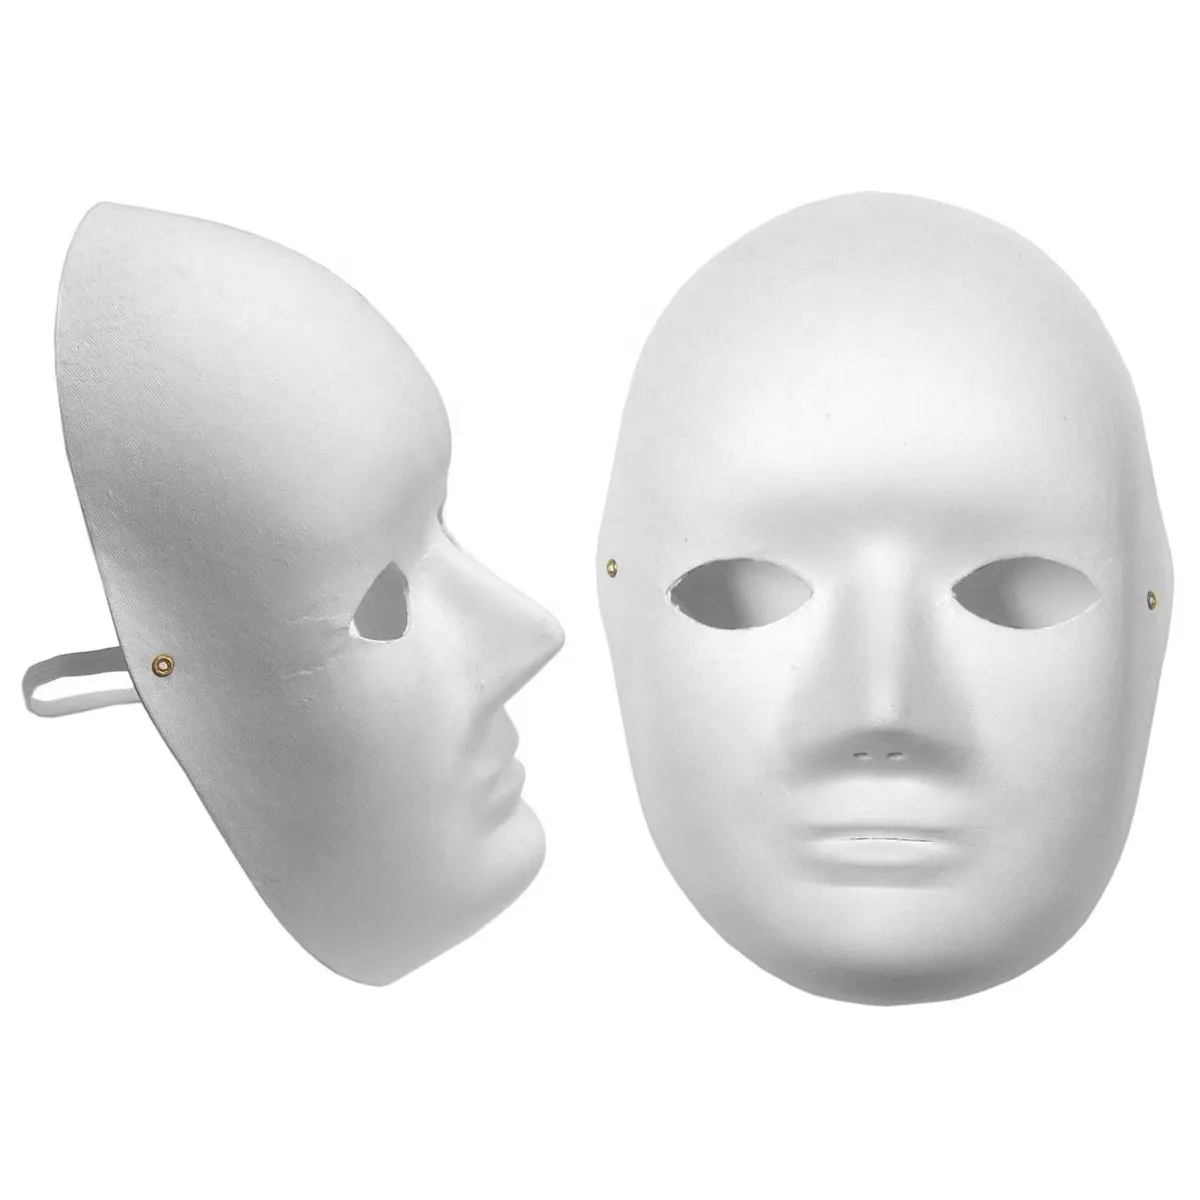 PoeticExist Men and Women Full Face White Color Party Favors Blank Paper Mache Masks